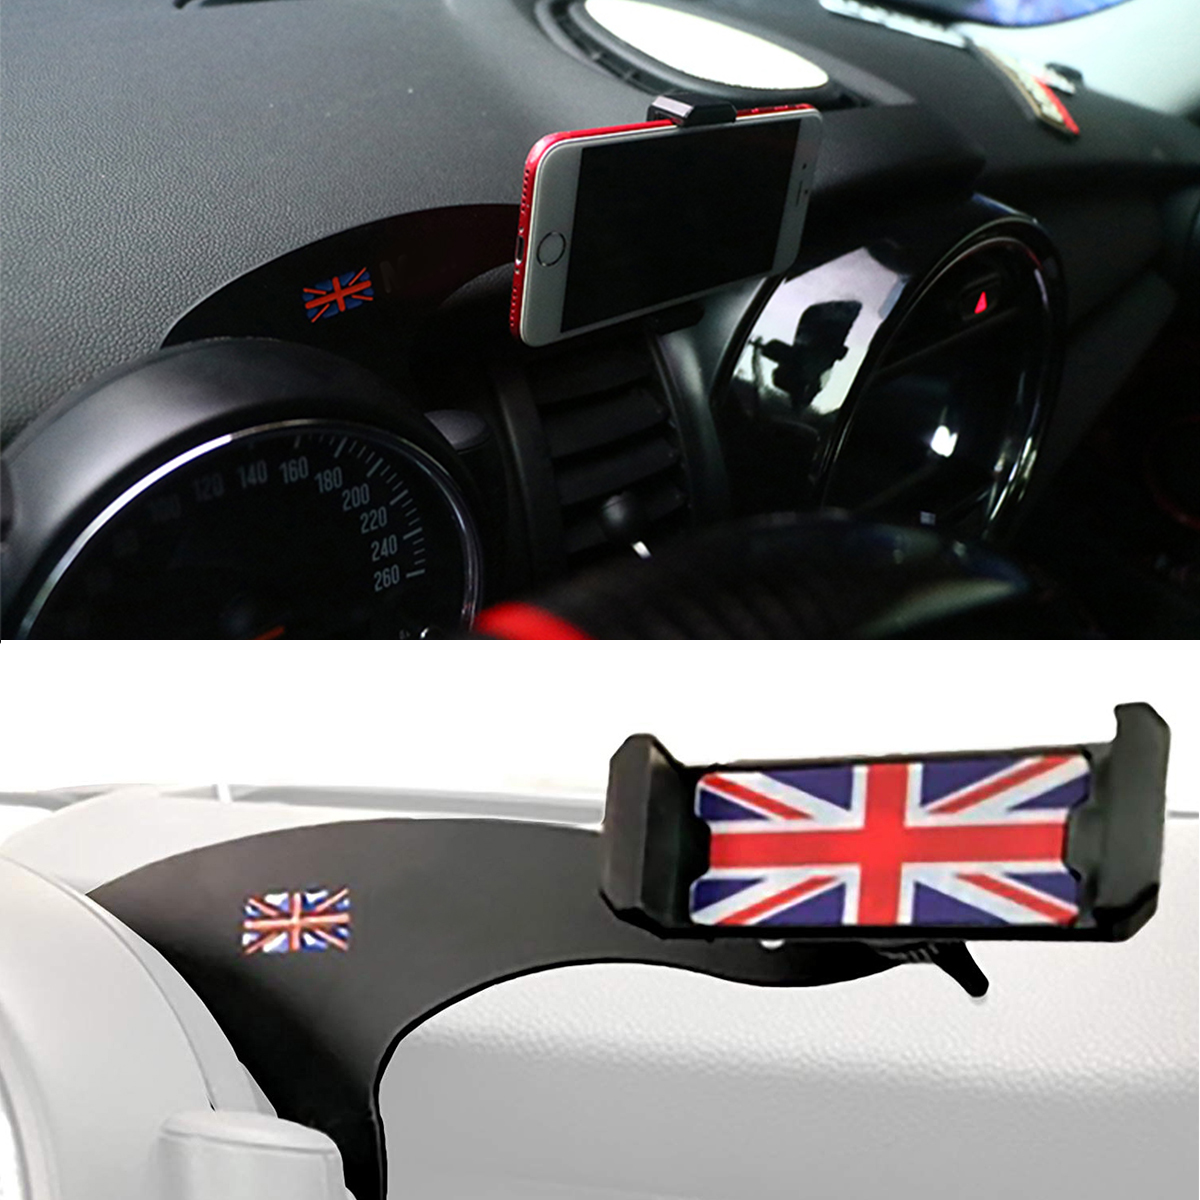 Bakeey-360deg-Rotation-Car-Phone-Mount-Cradle-Holder-Stand-for-Mini-Cooper-R60R61-F54F55F56-R55R56-F-1633190-10